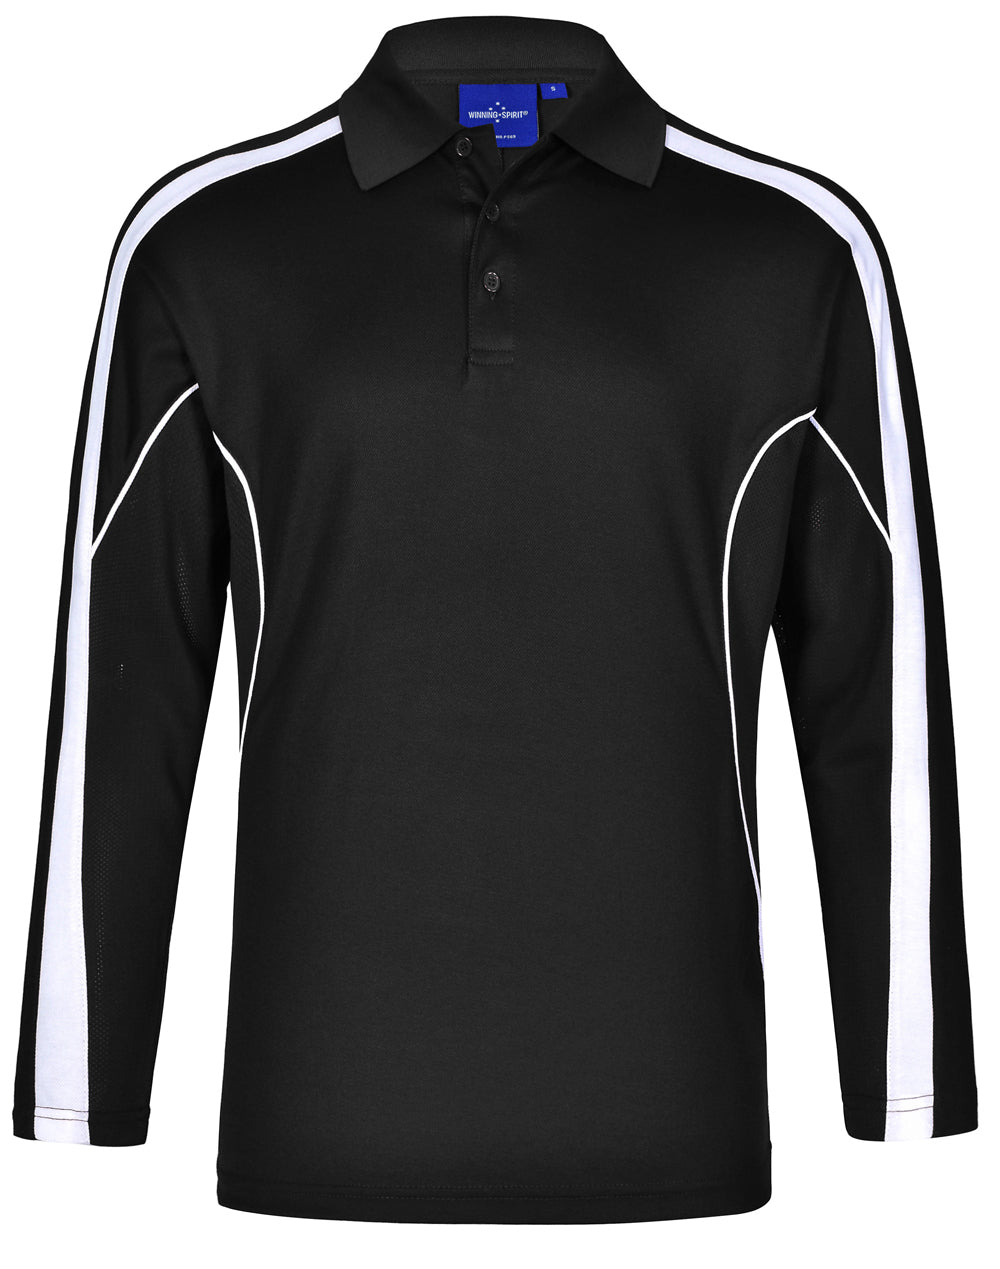 a black and white polo shirt with a blue and white stripe